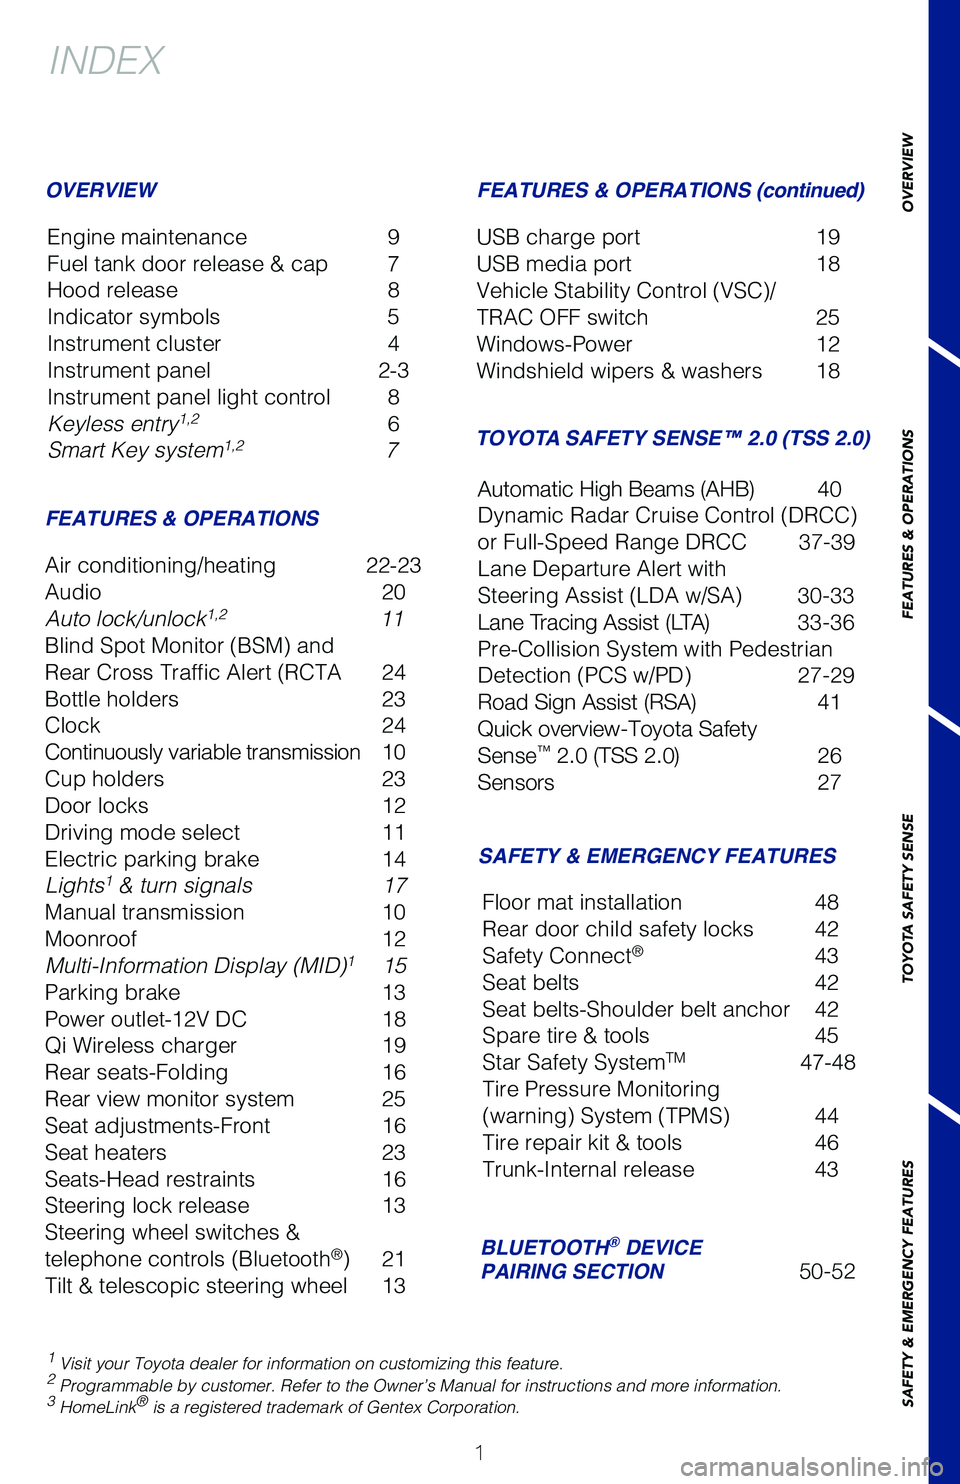 TOYOTA COROLLA 2021  Owners Manual (in English) SAFETY & EMERGENCY FEATURES
FEATURES & OPERATIONS (continued)
BLUETOOTH
® DEVICE  
PAIRING SECTION 
63926_Corolla_Txt.indd   163926_Corolla_Txt.indd   13/24/20   9:03 AM3/24/20   9:03 AM 